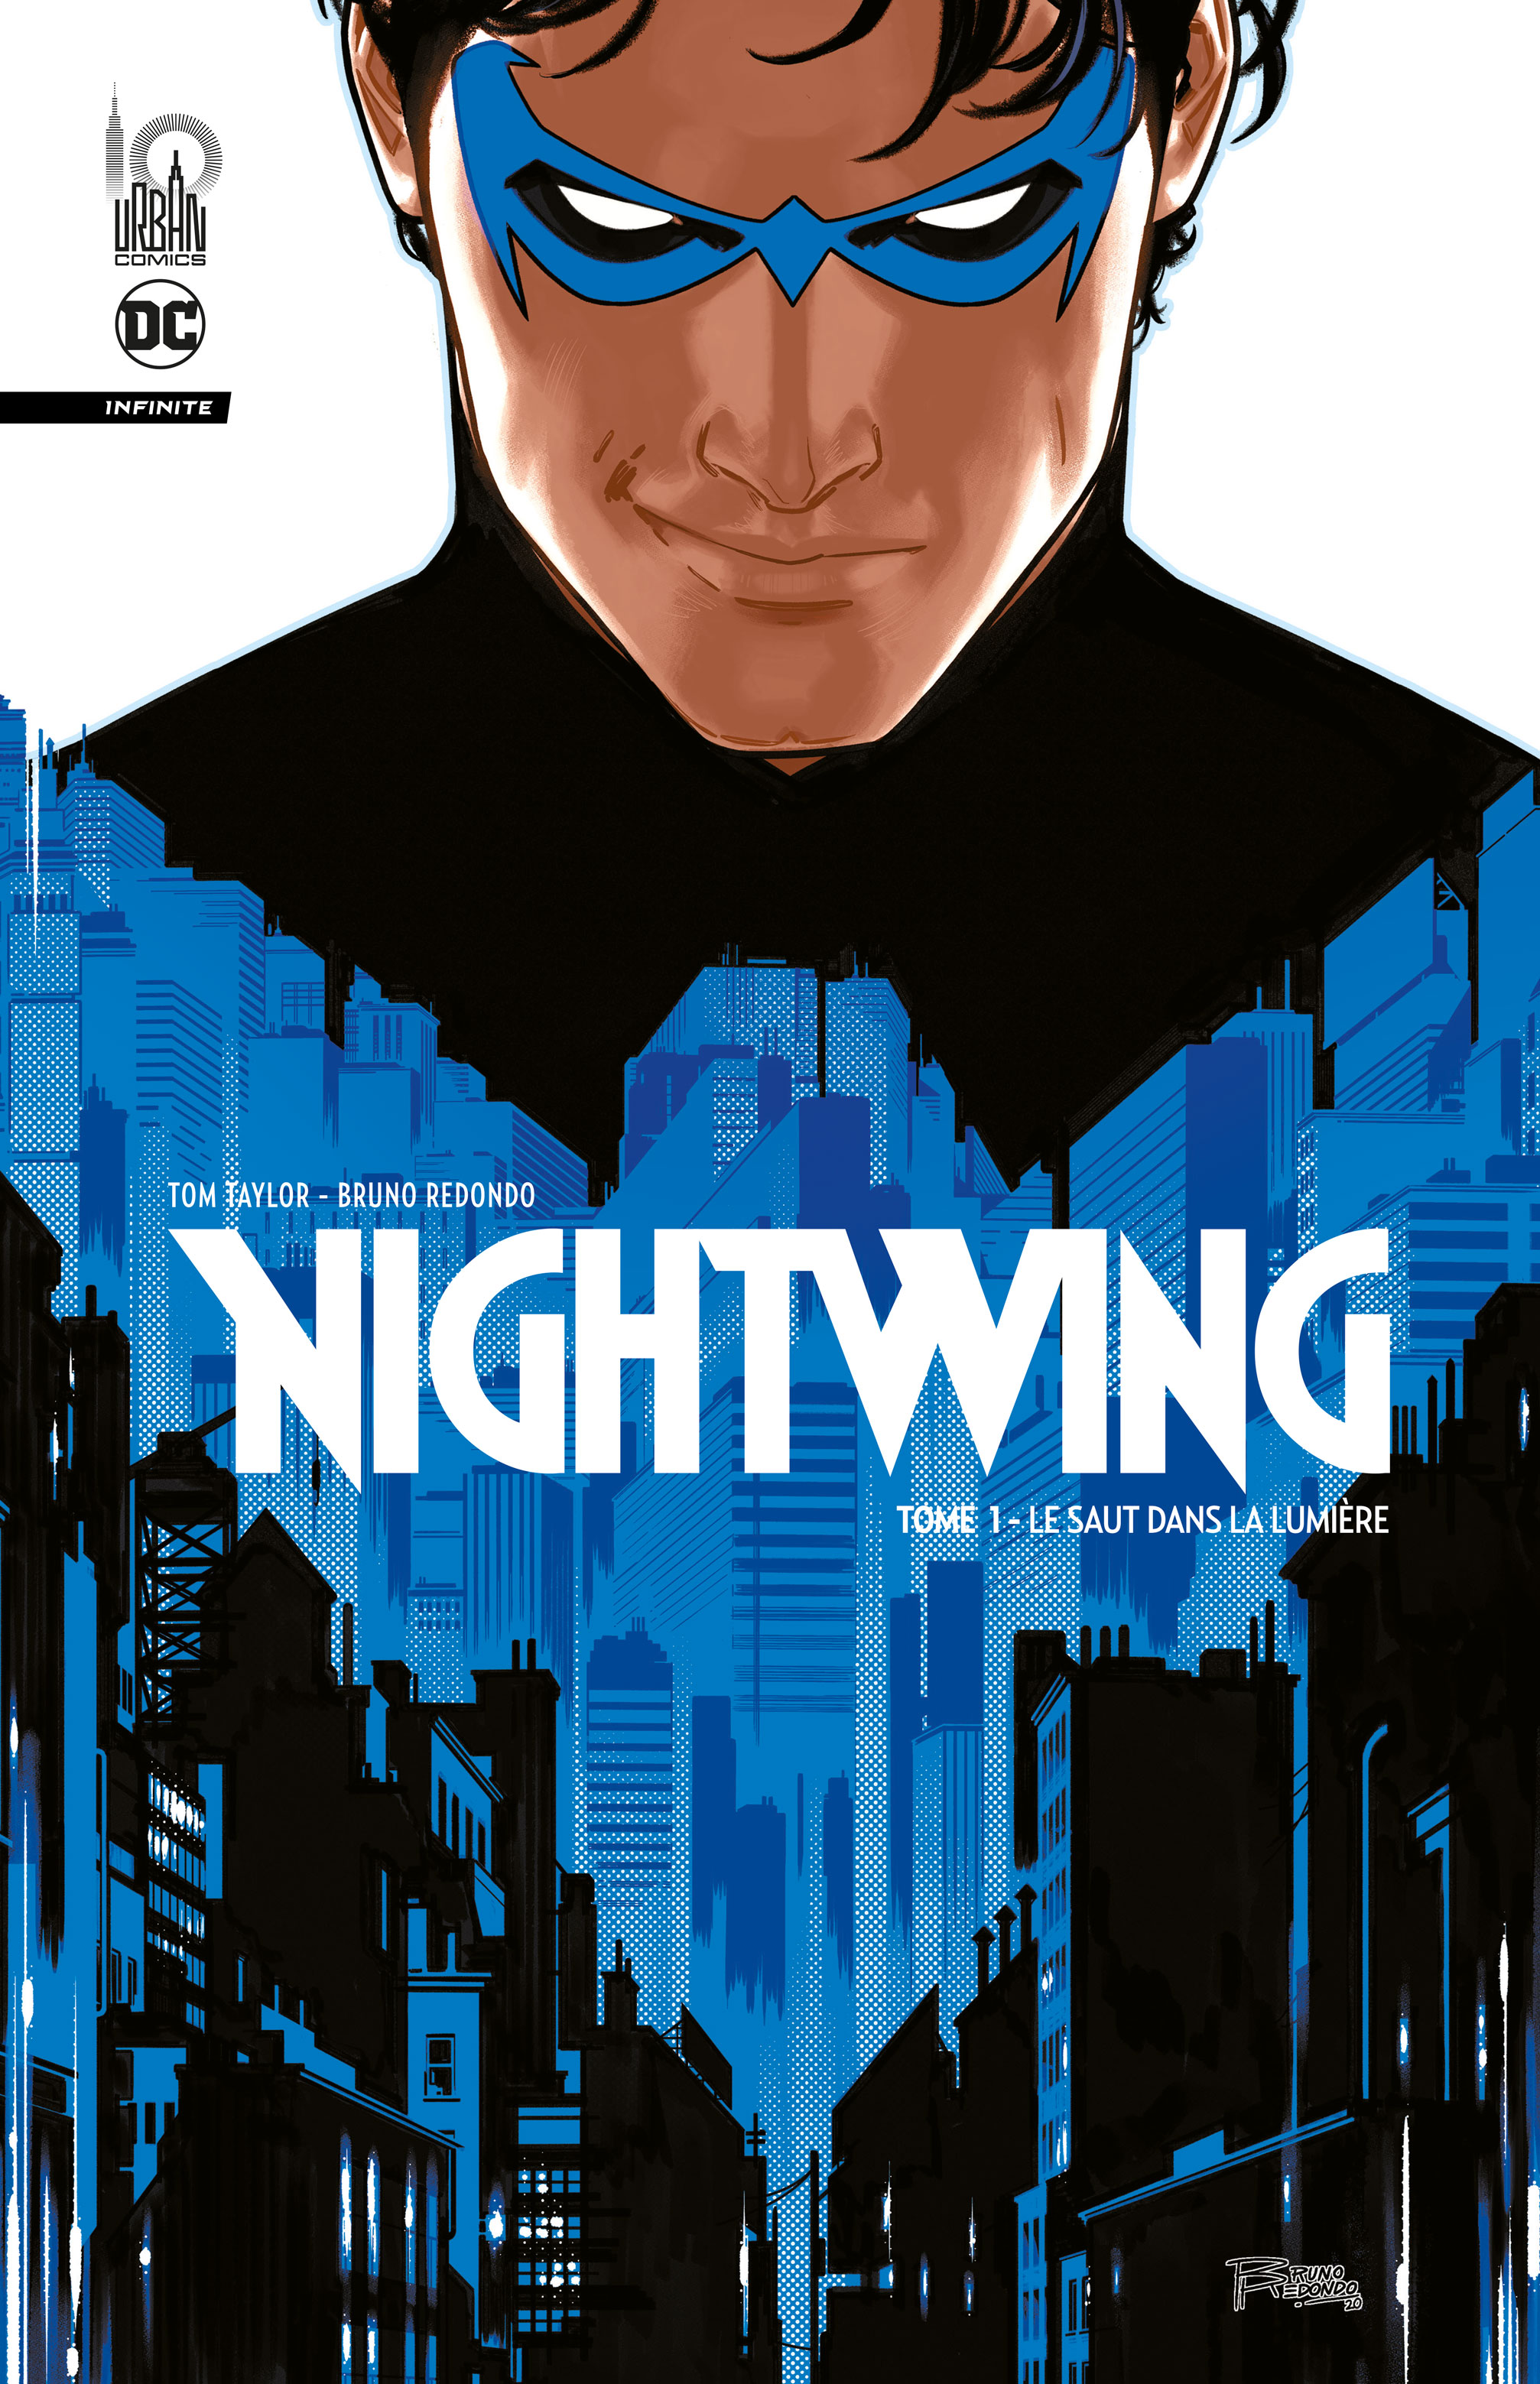 Nightwing Infinite – Tome 1 - couv